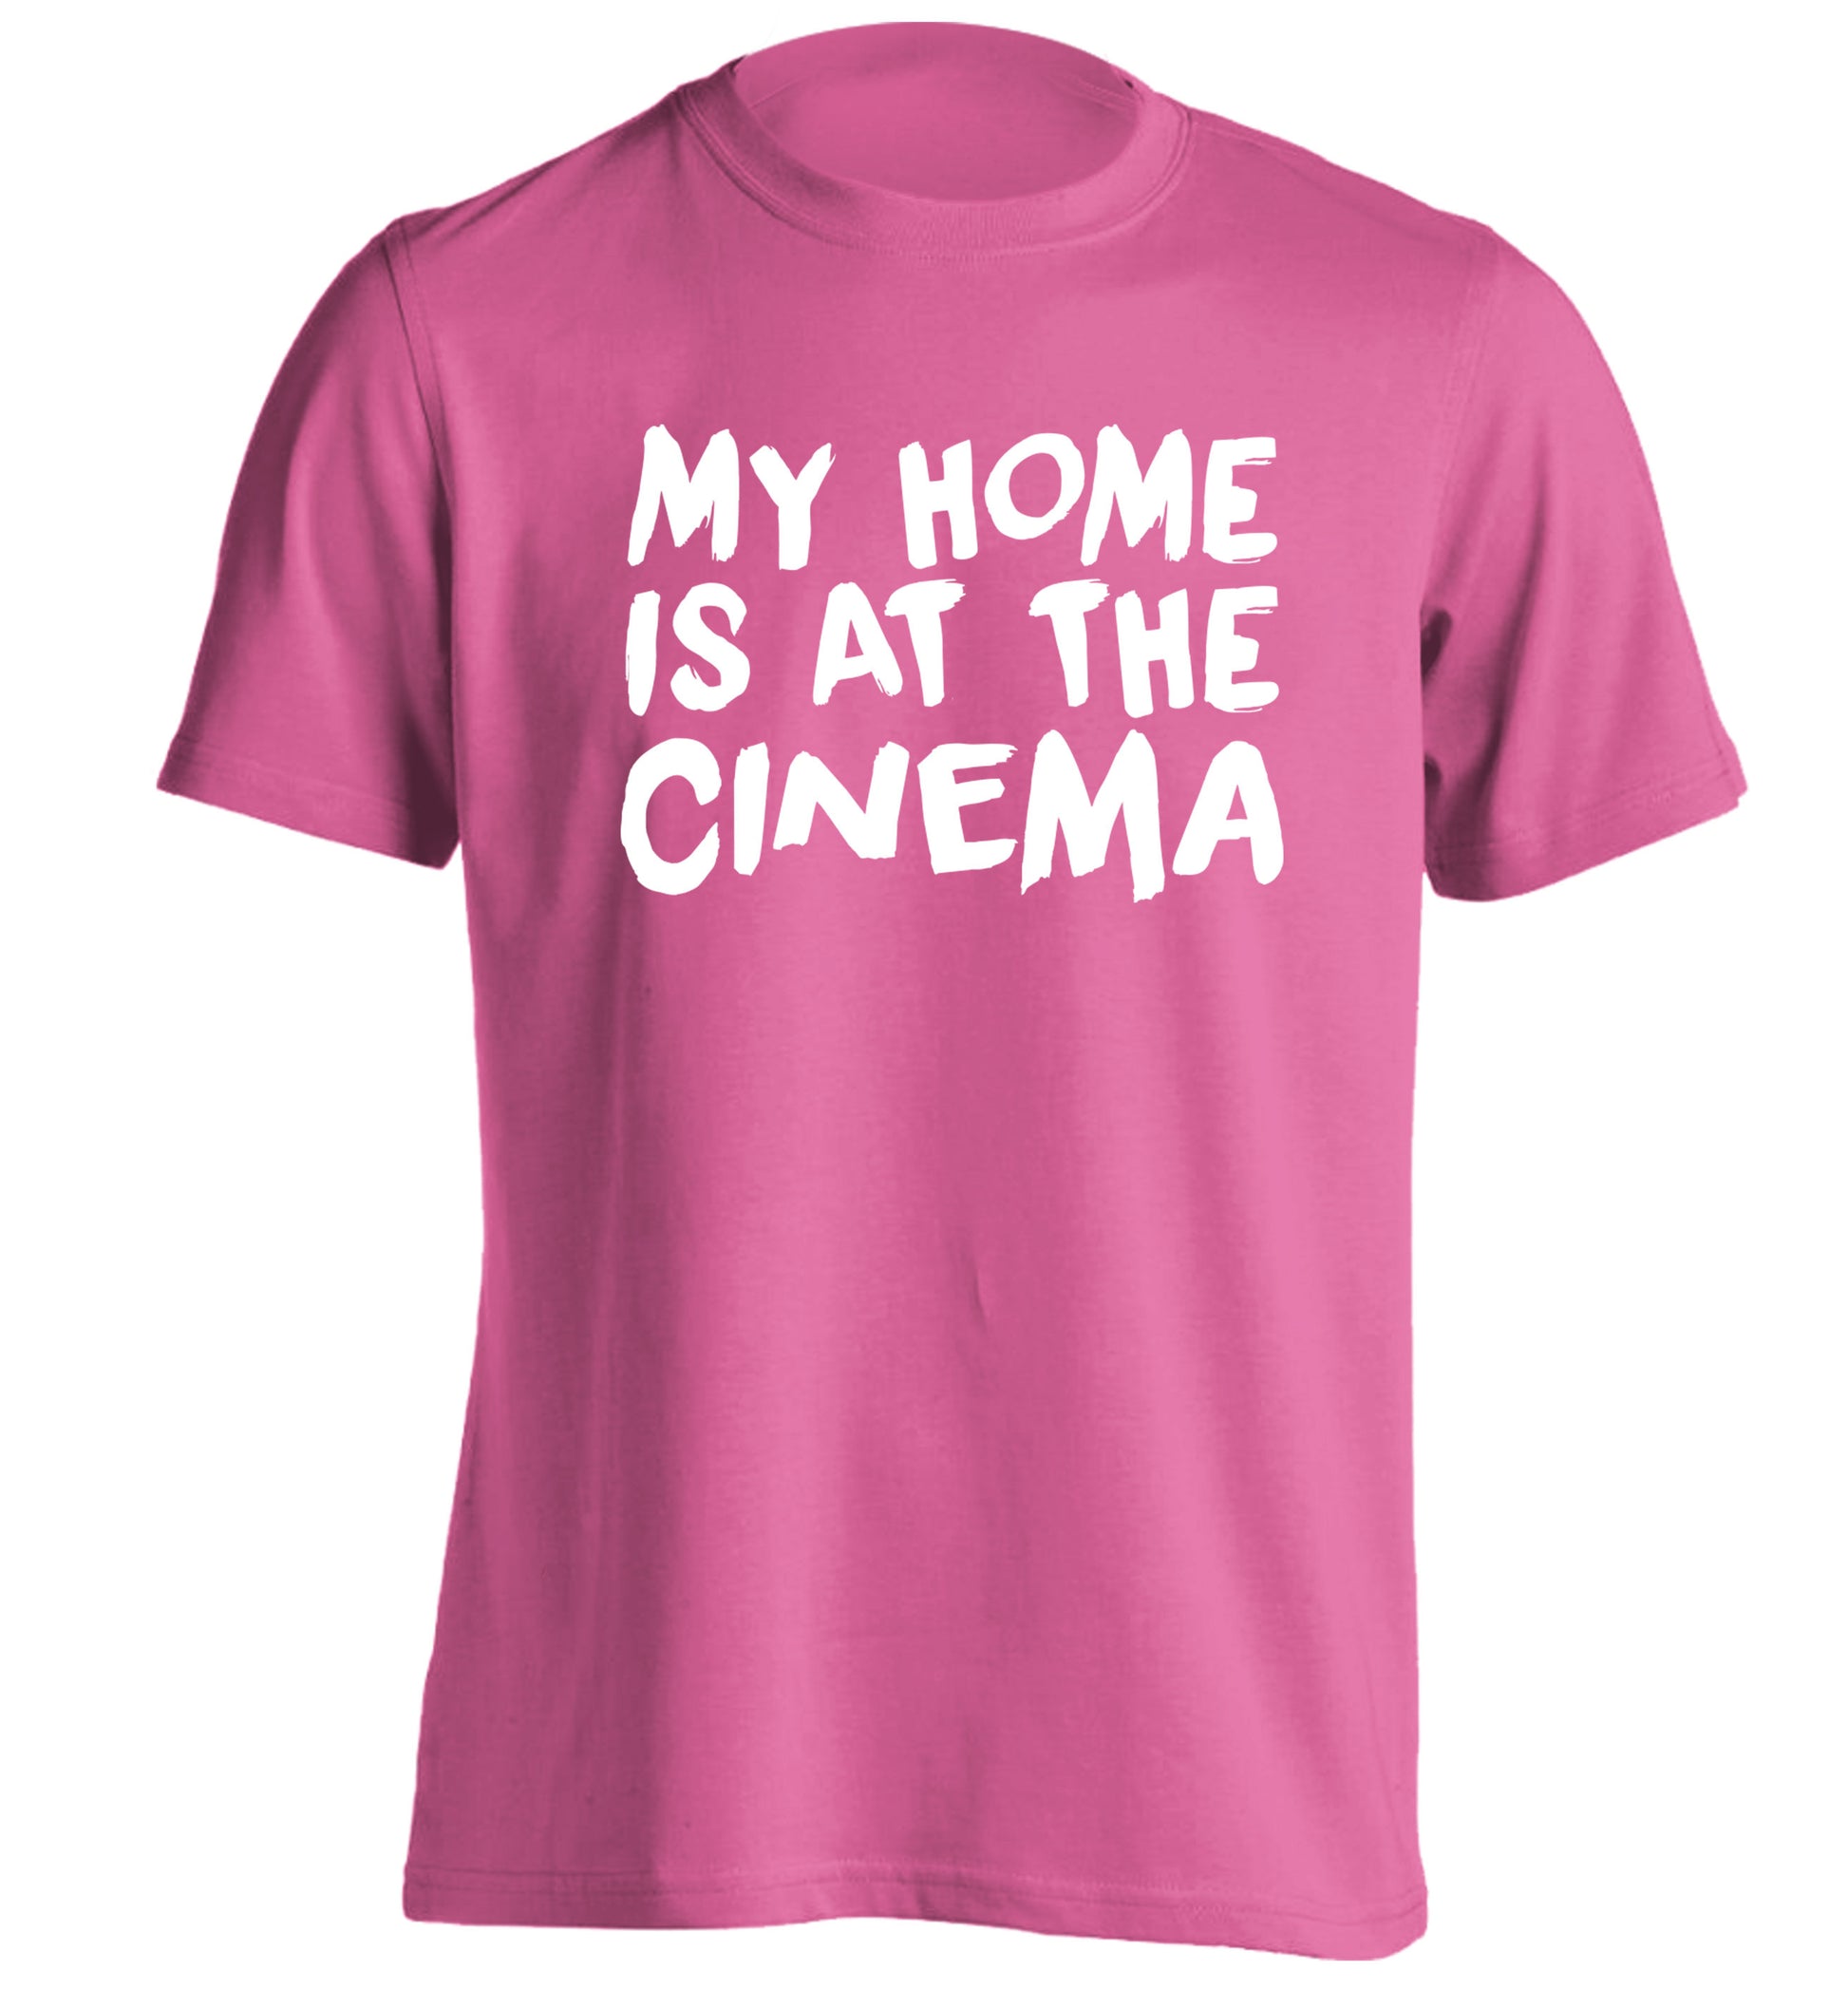 My home is at the cinema adults unisex pink Tshirt 2XL